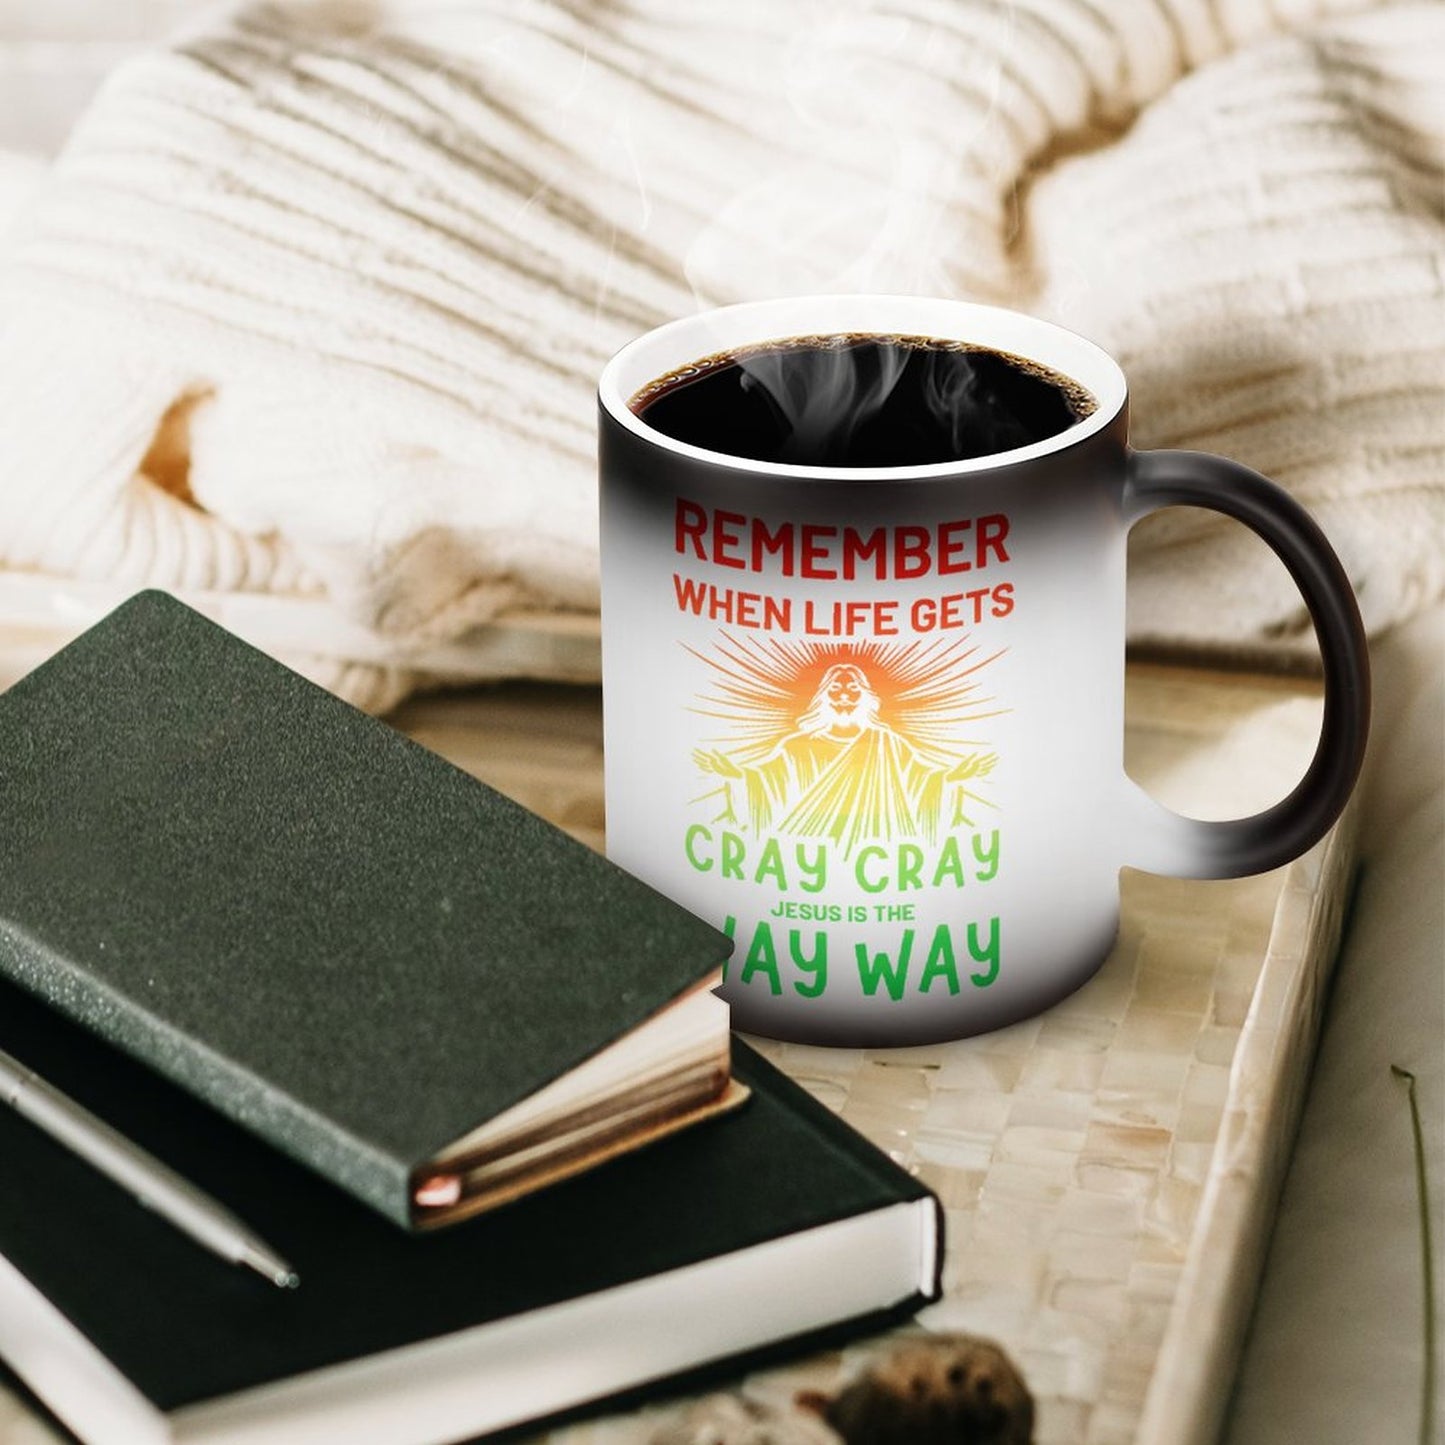 Remember When Life Gets Cray Cray Jesus Is The Way Way Christian Color Changing Mug (Dual-sided)